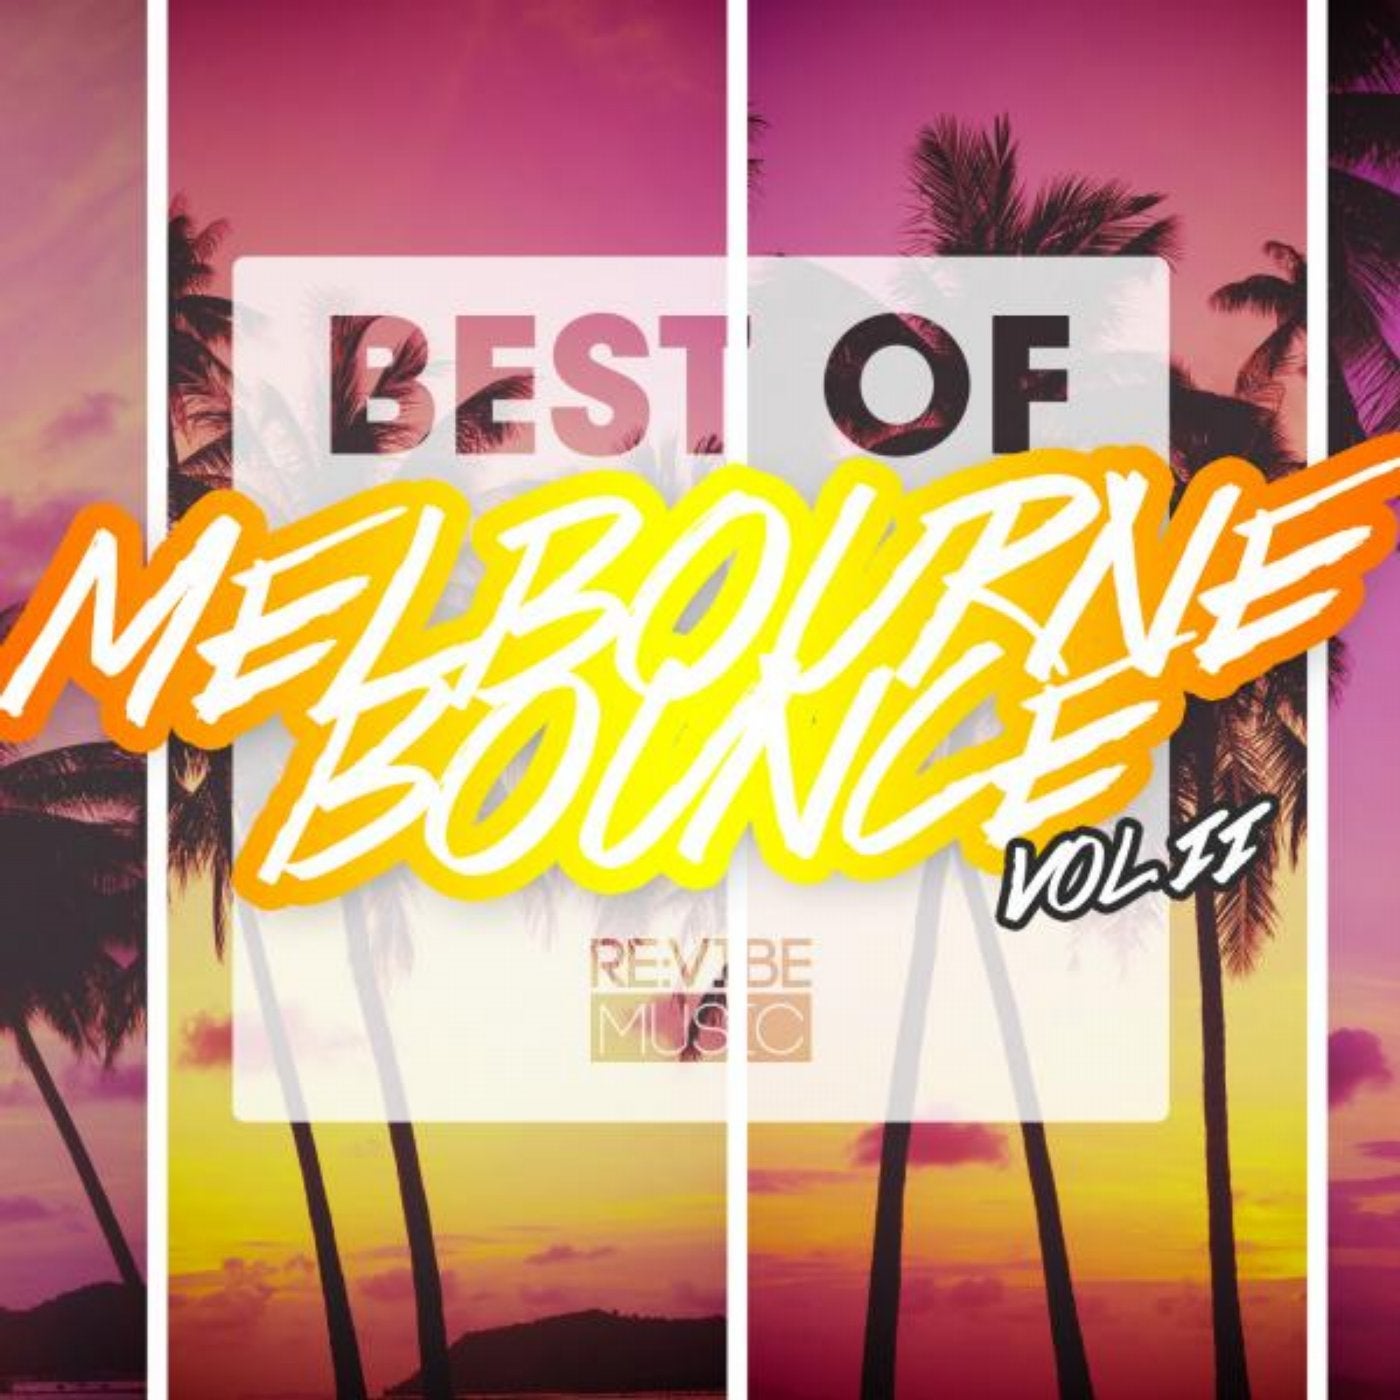 Best of Melbourne Bounce Vol. 2